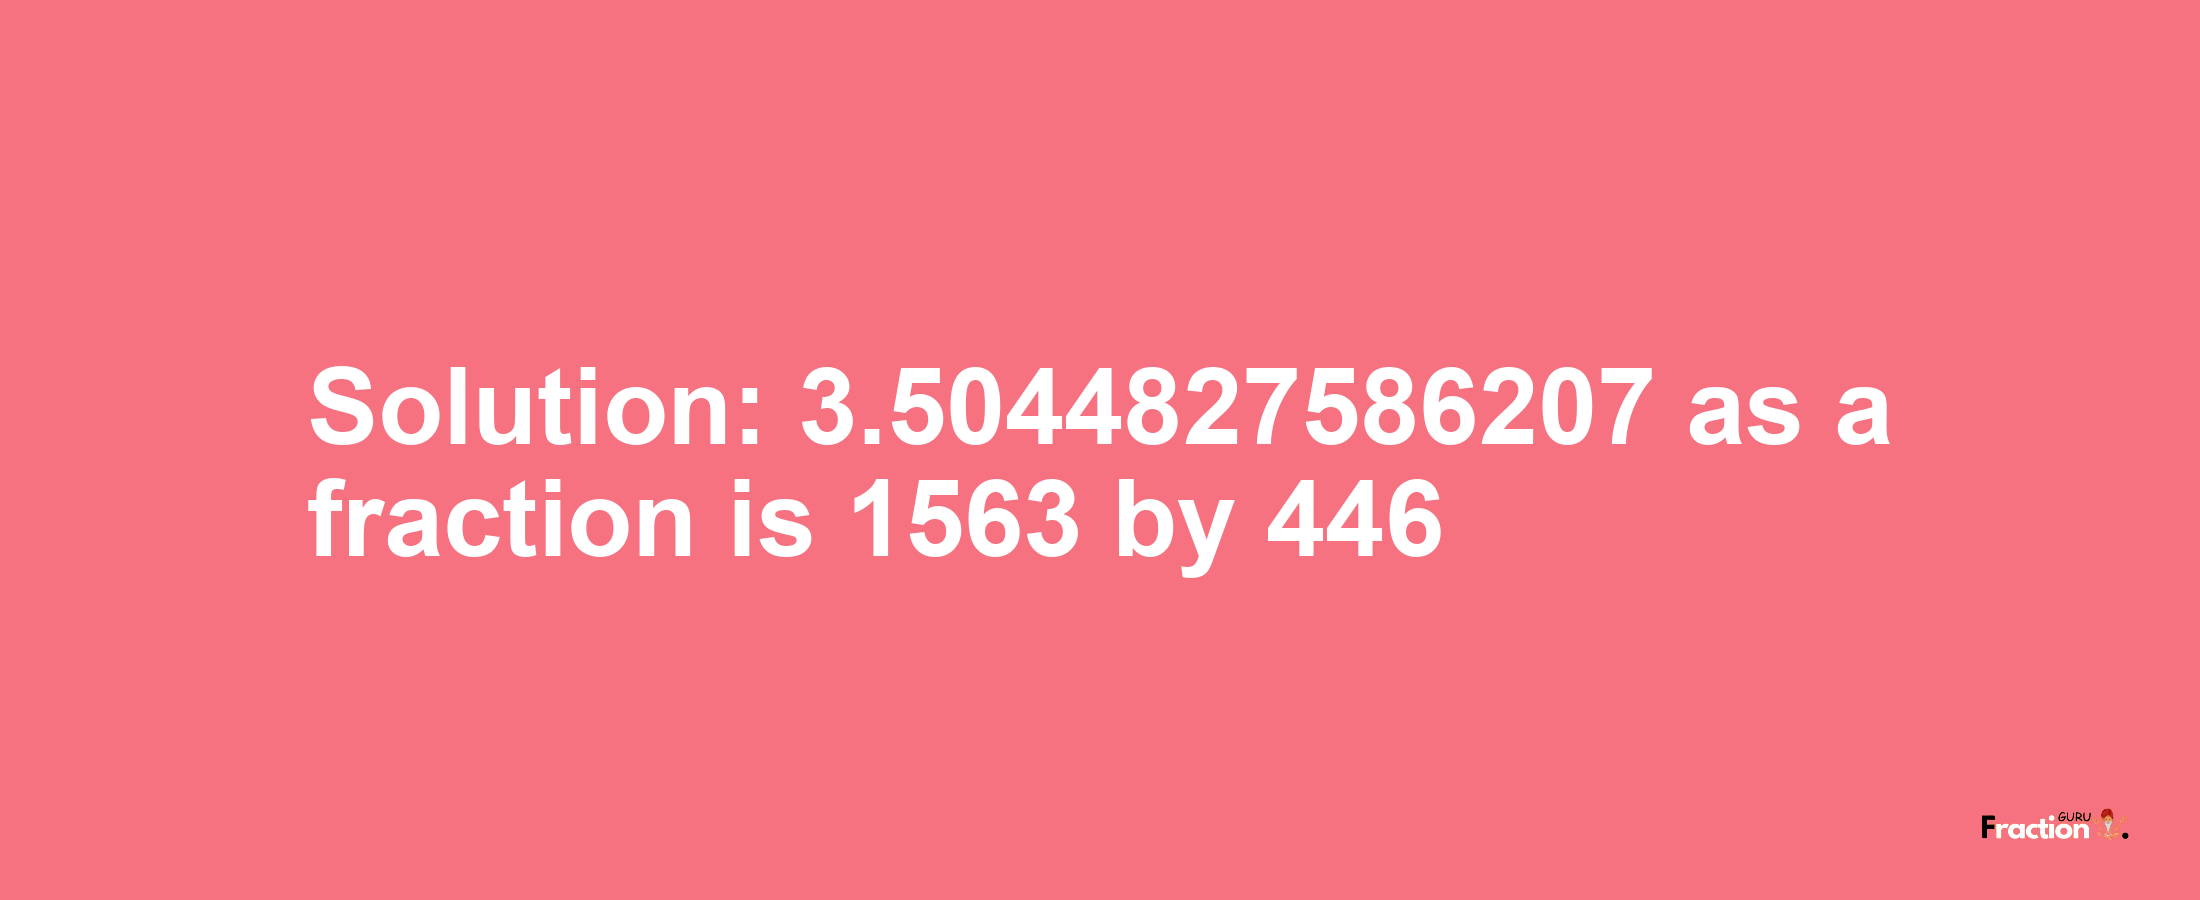 Solution:3.5044827586207 as a fraction is 1563/446